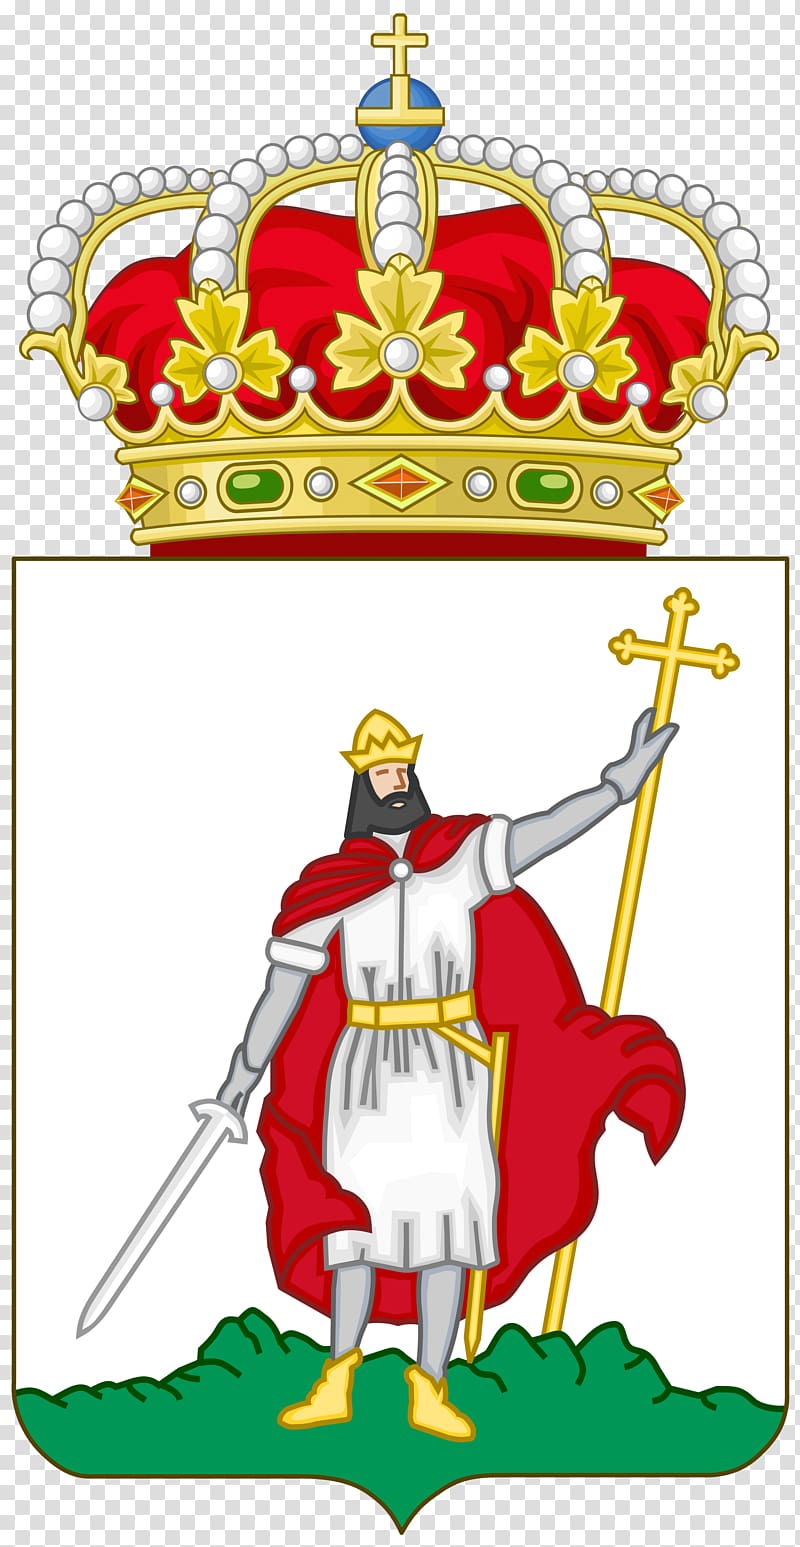 Royal coat of arms of the United Kingdom Spain Coat of arms of the Community of Madrid Wikipedia, Asturias transparent background PNG clipart